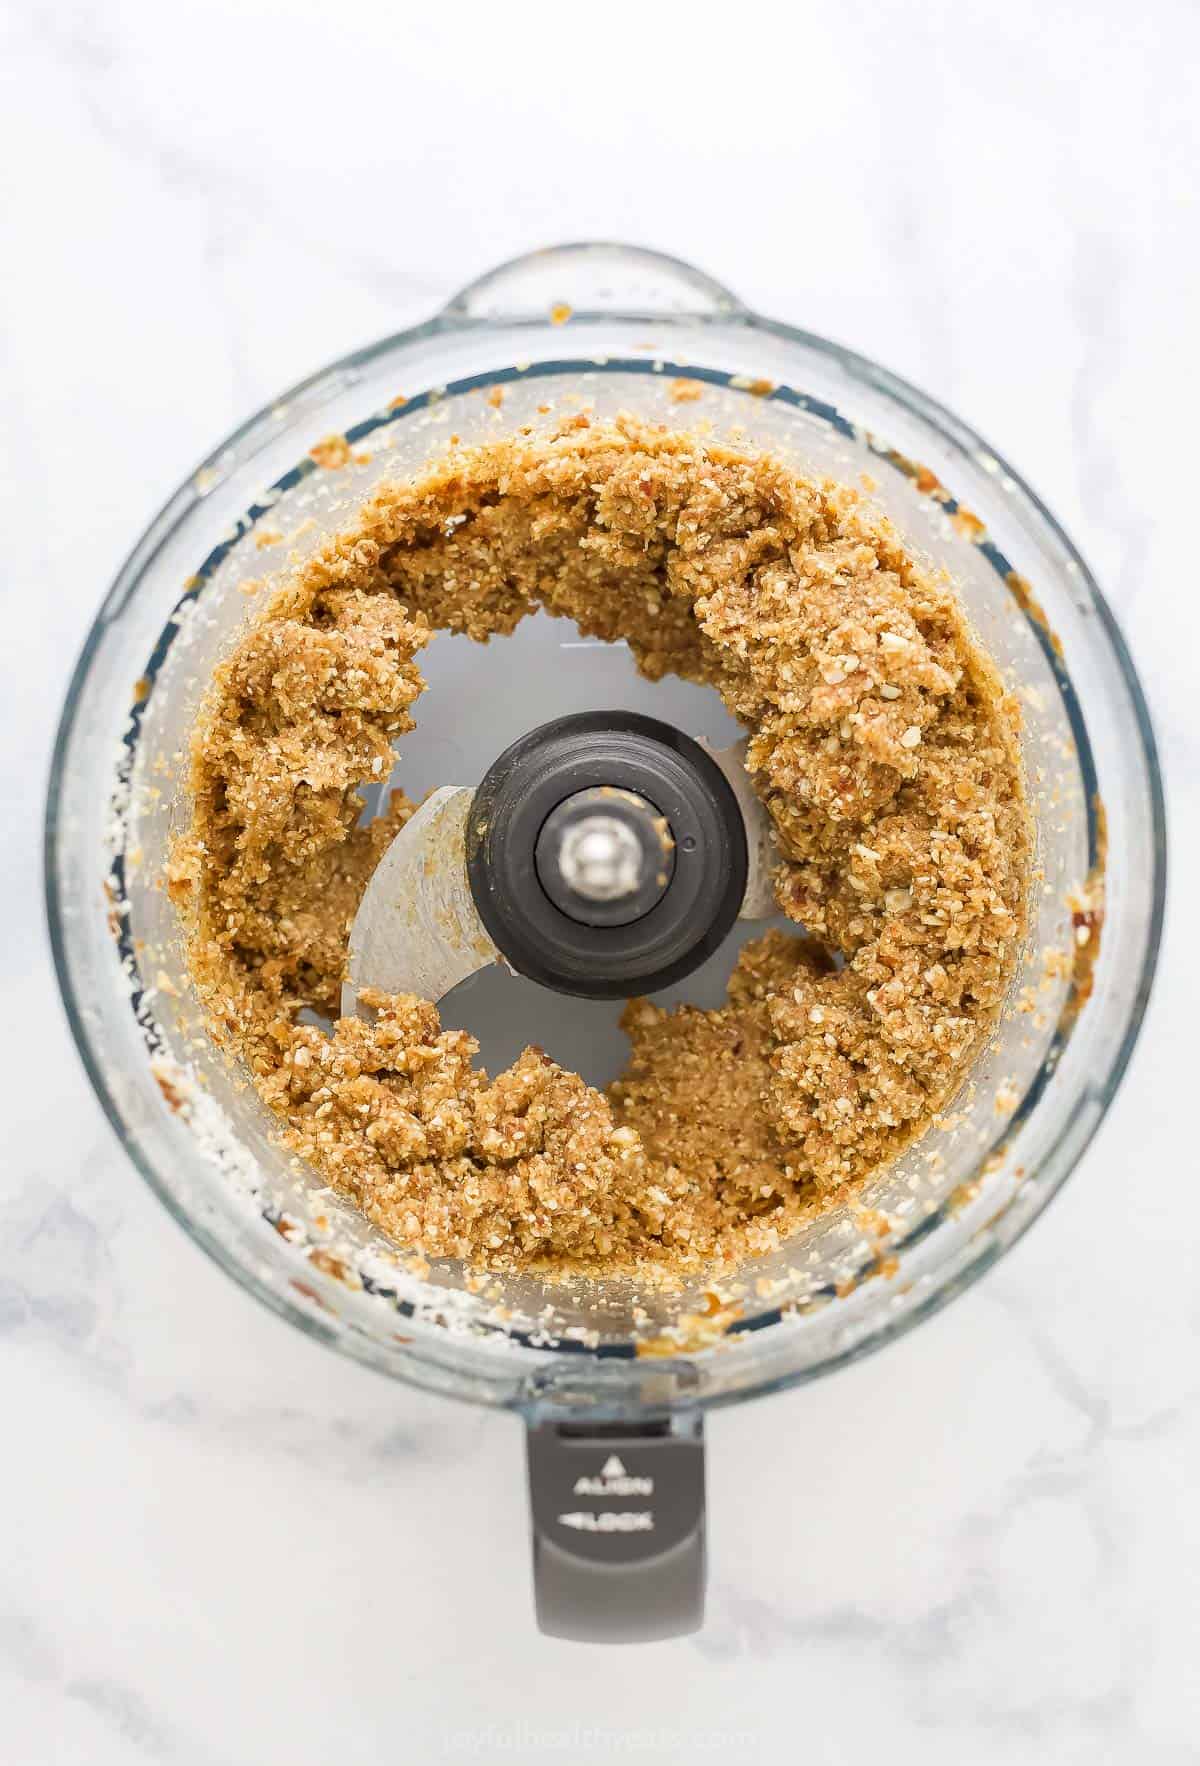 The completed protein bite dough inside of a food processor